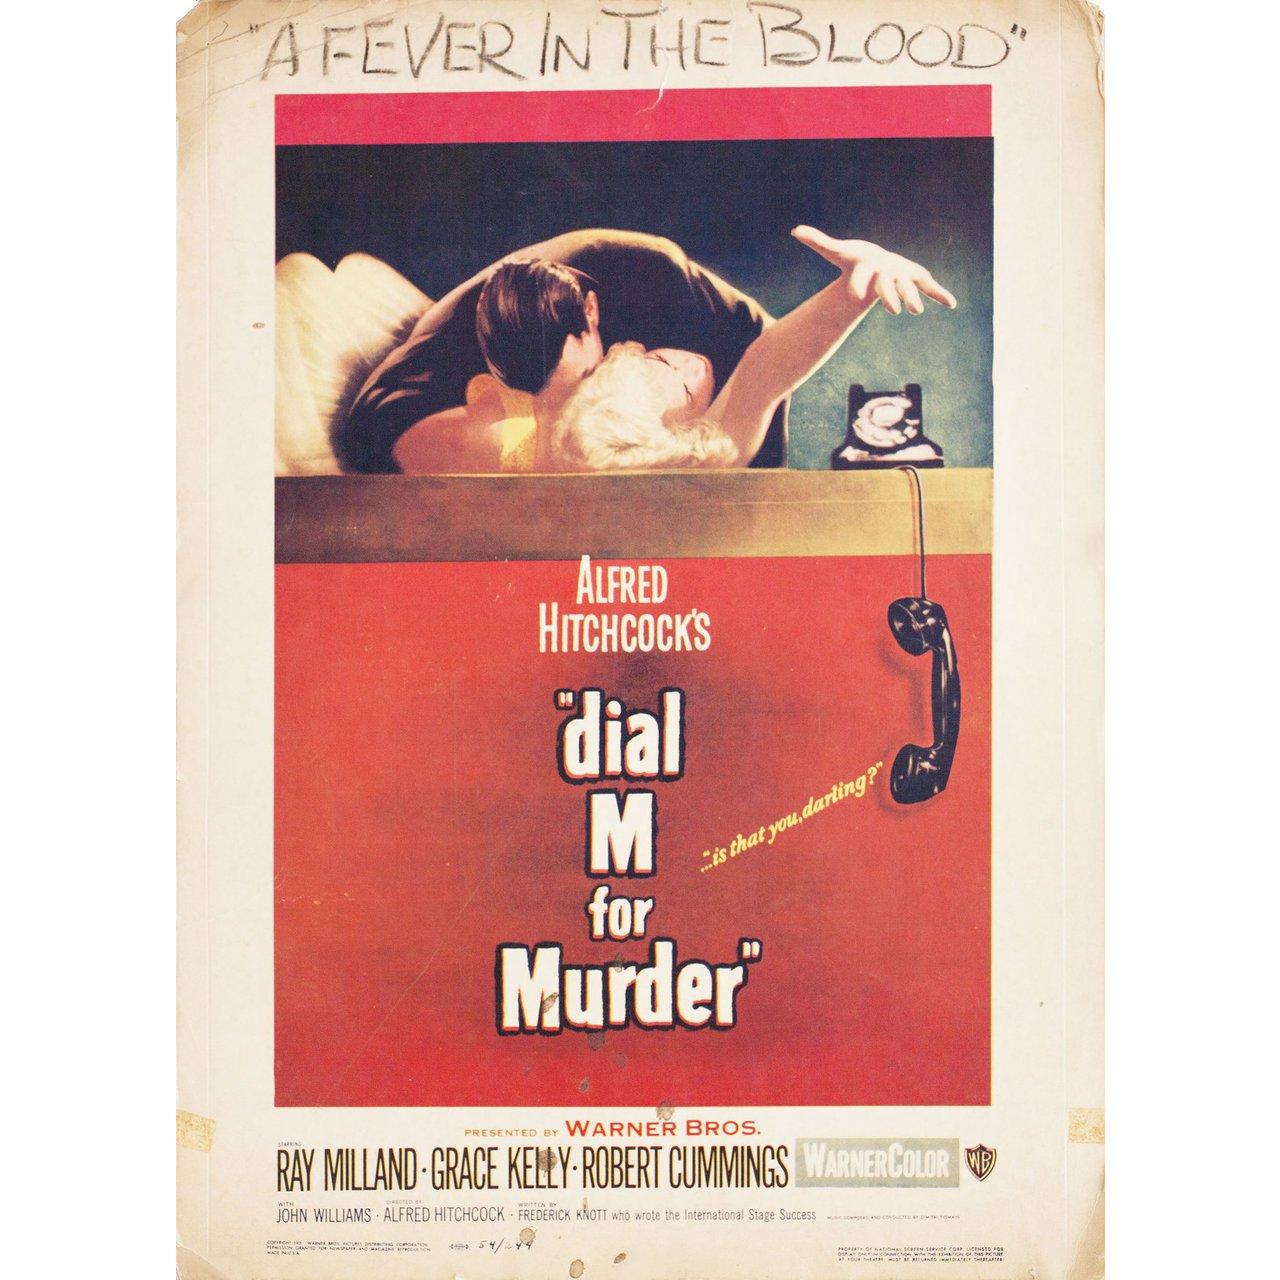 Original 1954 U.S. window card poster by Bill Gold for the film Dial M for Murder directed by Alfred Hitchcock with Ray Milland / Grace Kelly / Robert Cummings / John Williams. Very good-fine condition, rolled and trimmed to 14 x 19.5. Please note: